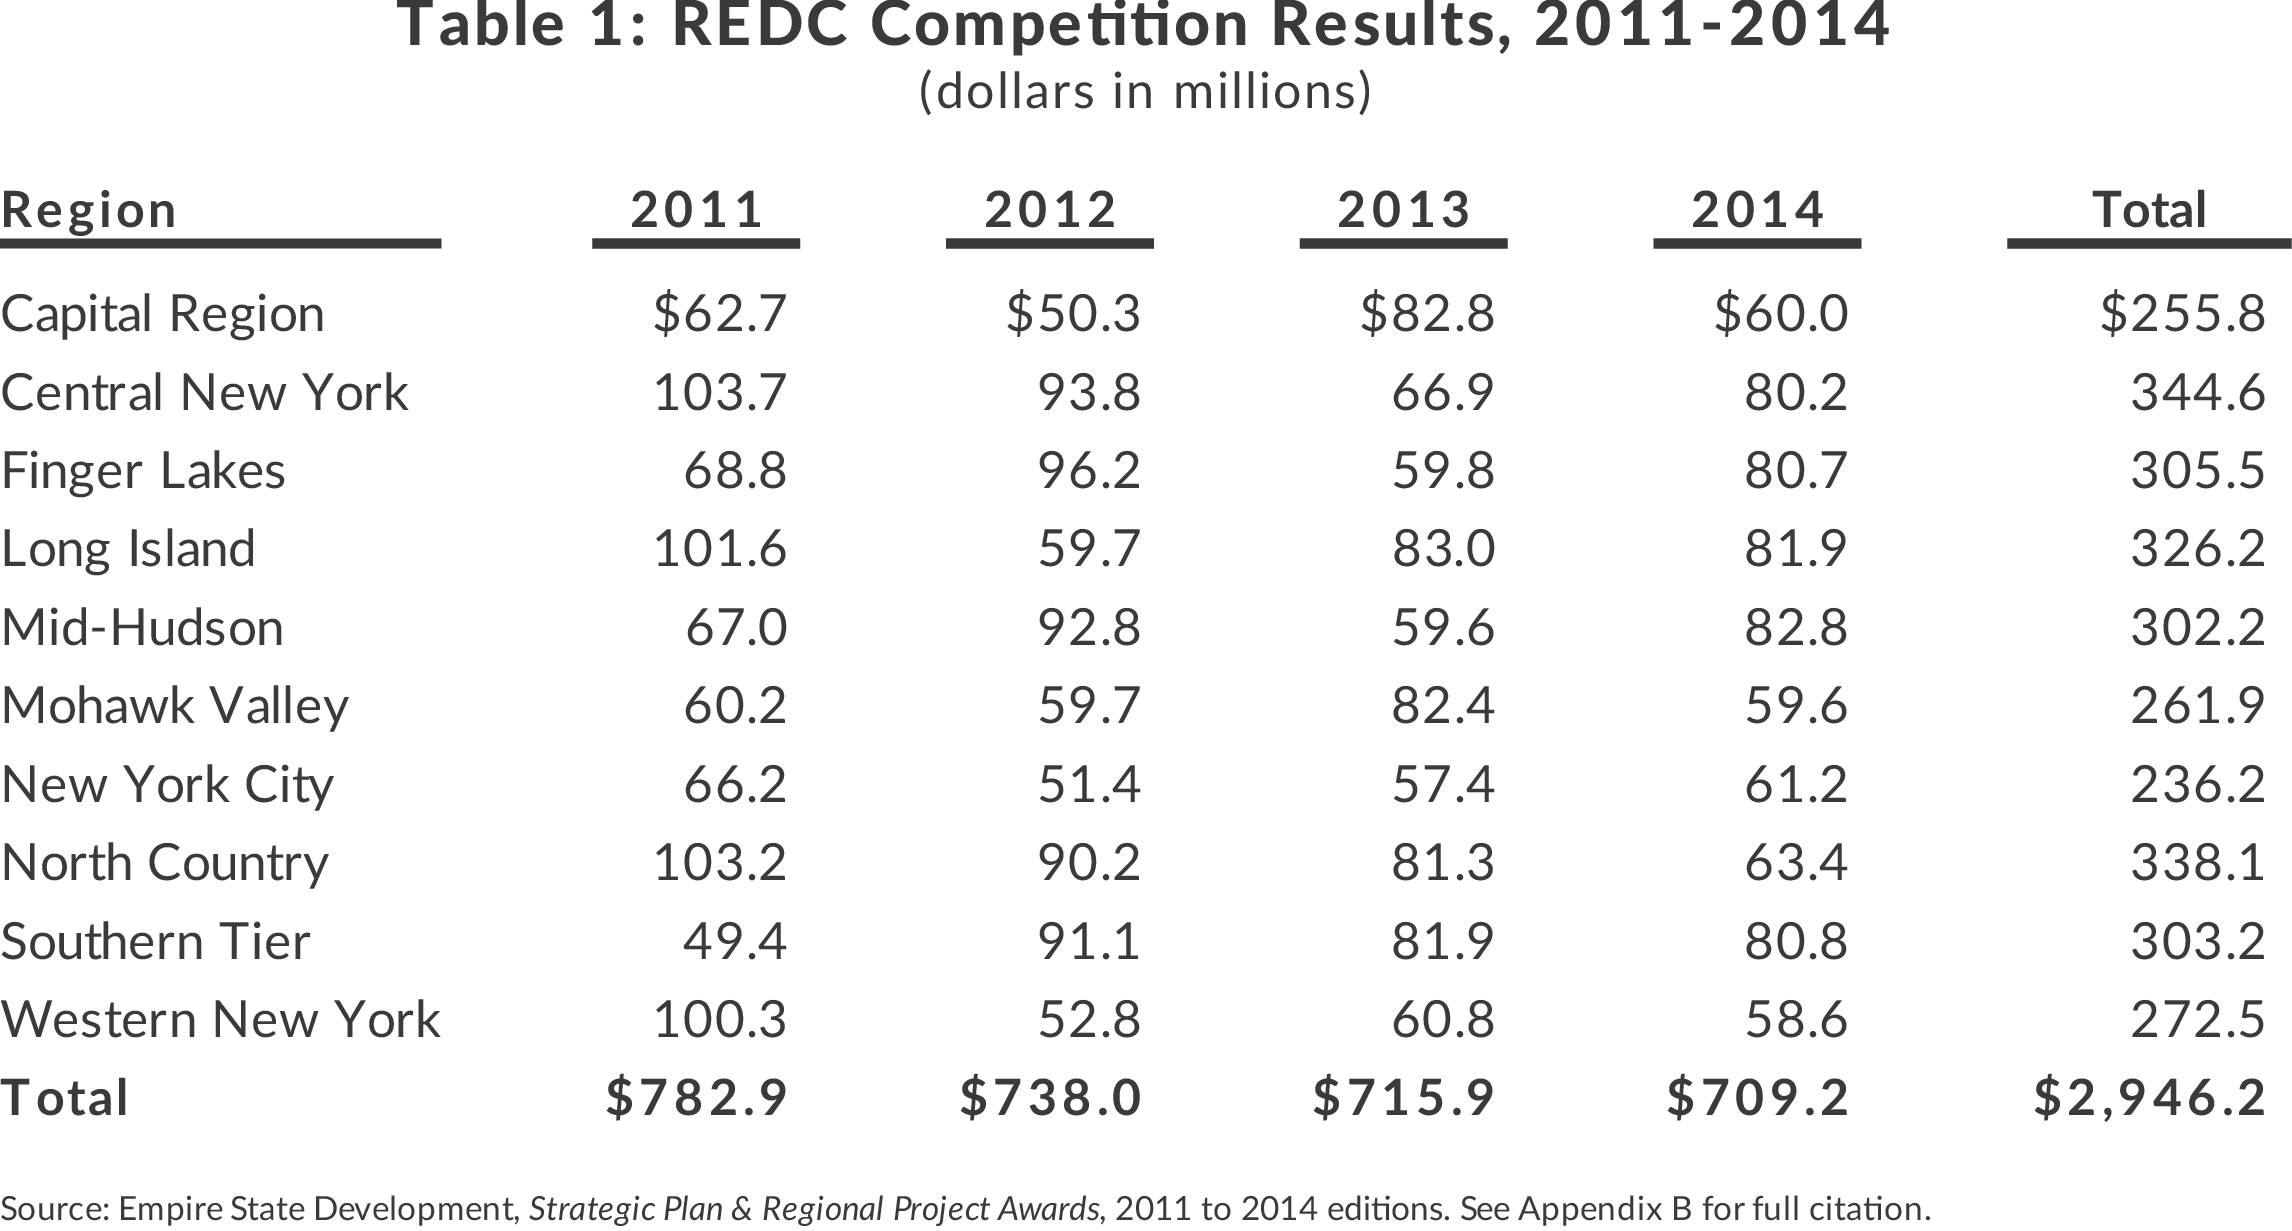 New York State Regional Economic Development Councils Competition Results 2011 to 2014